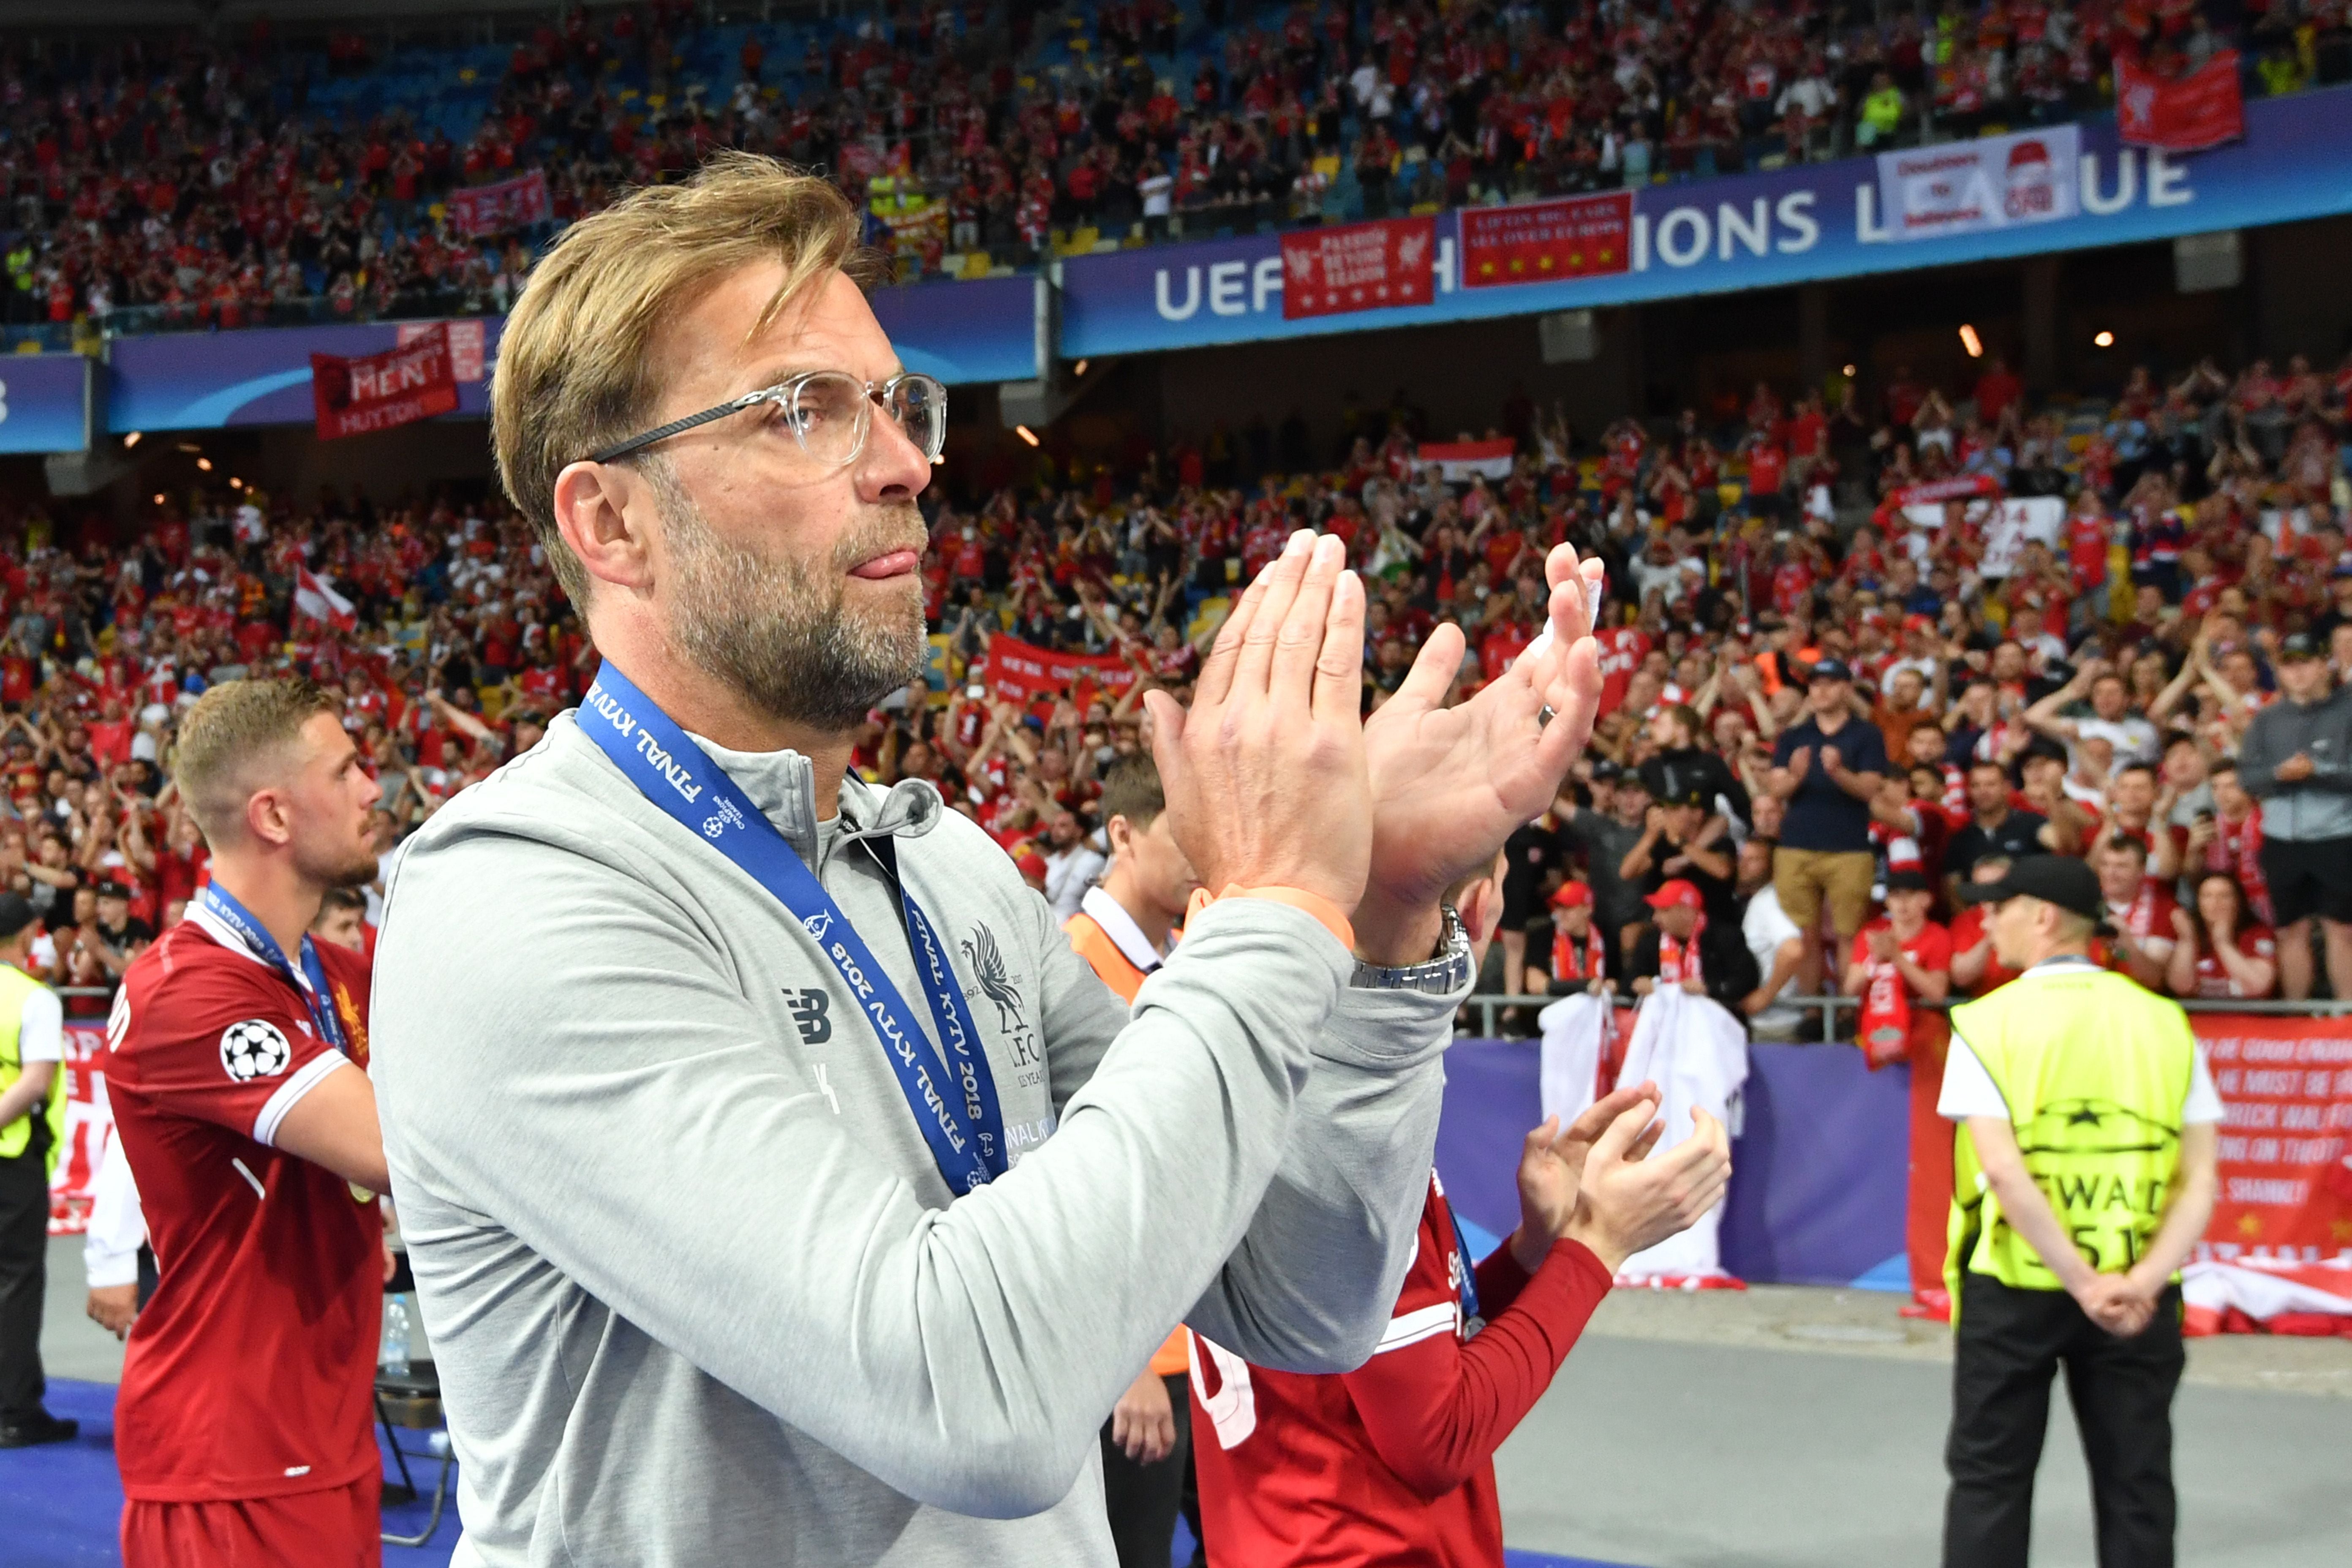 Jurgen Klopp and his staff ensured Liverpool reacted to the 2018 final defeat in the right manner to bounce back